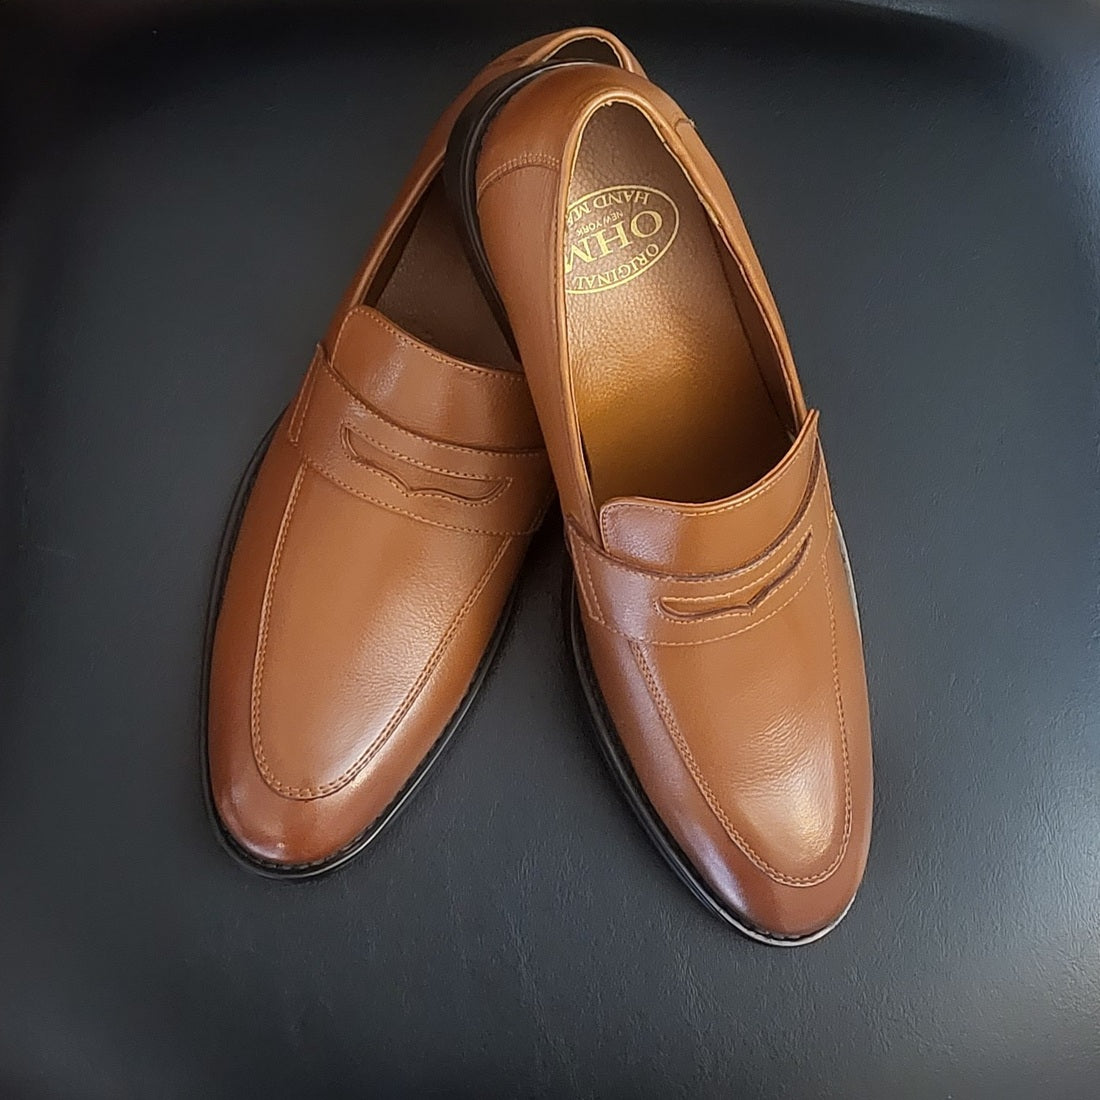 OHM New York Soft Grained Leather Double Stitched Penny Loafer Shoes